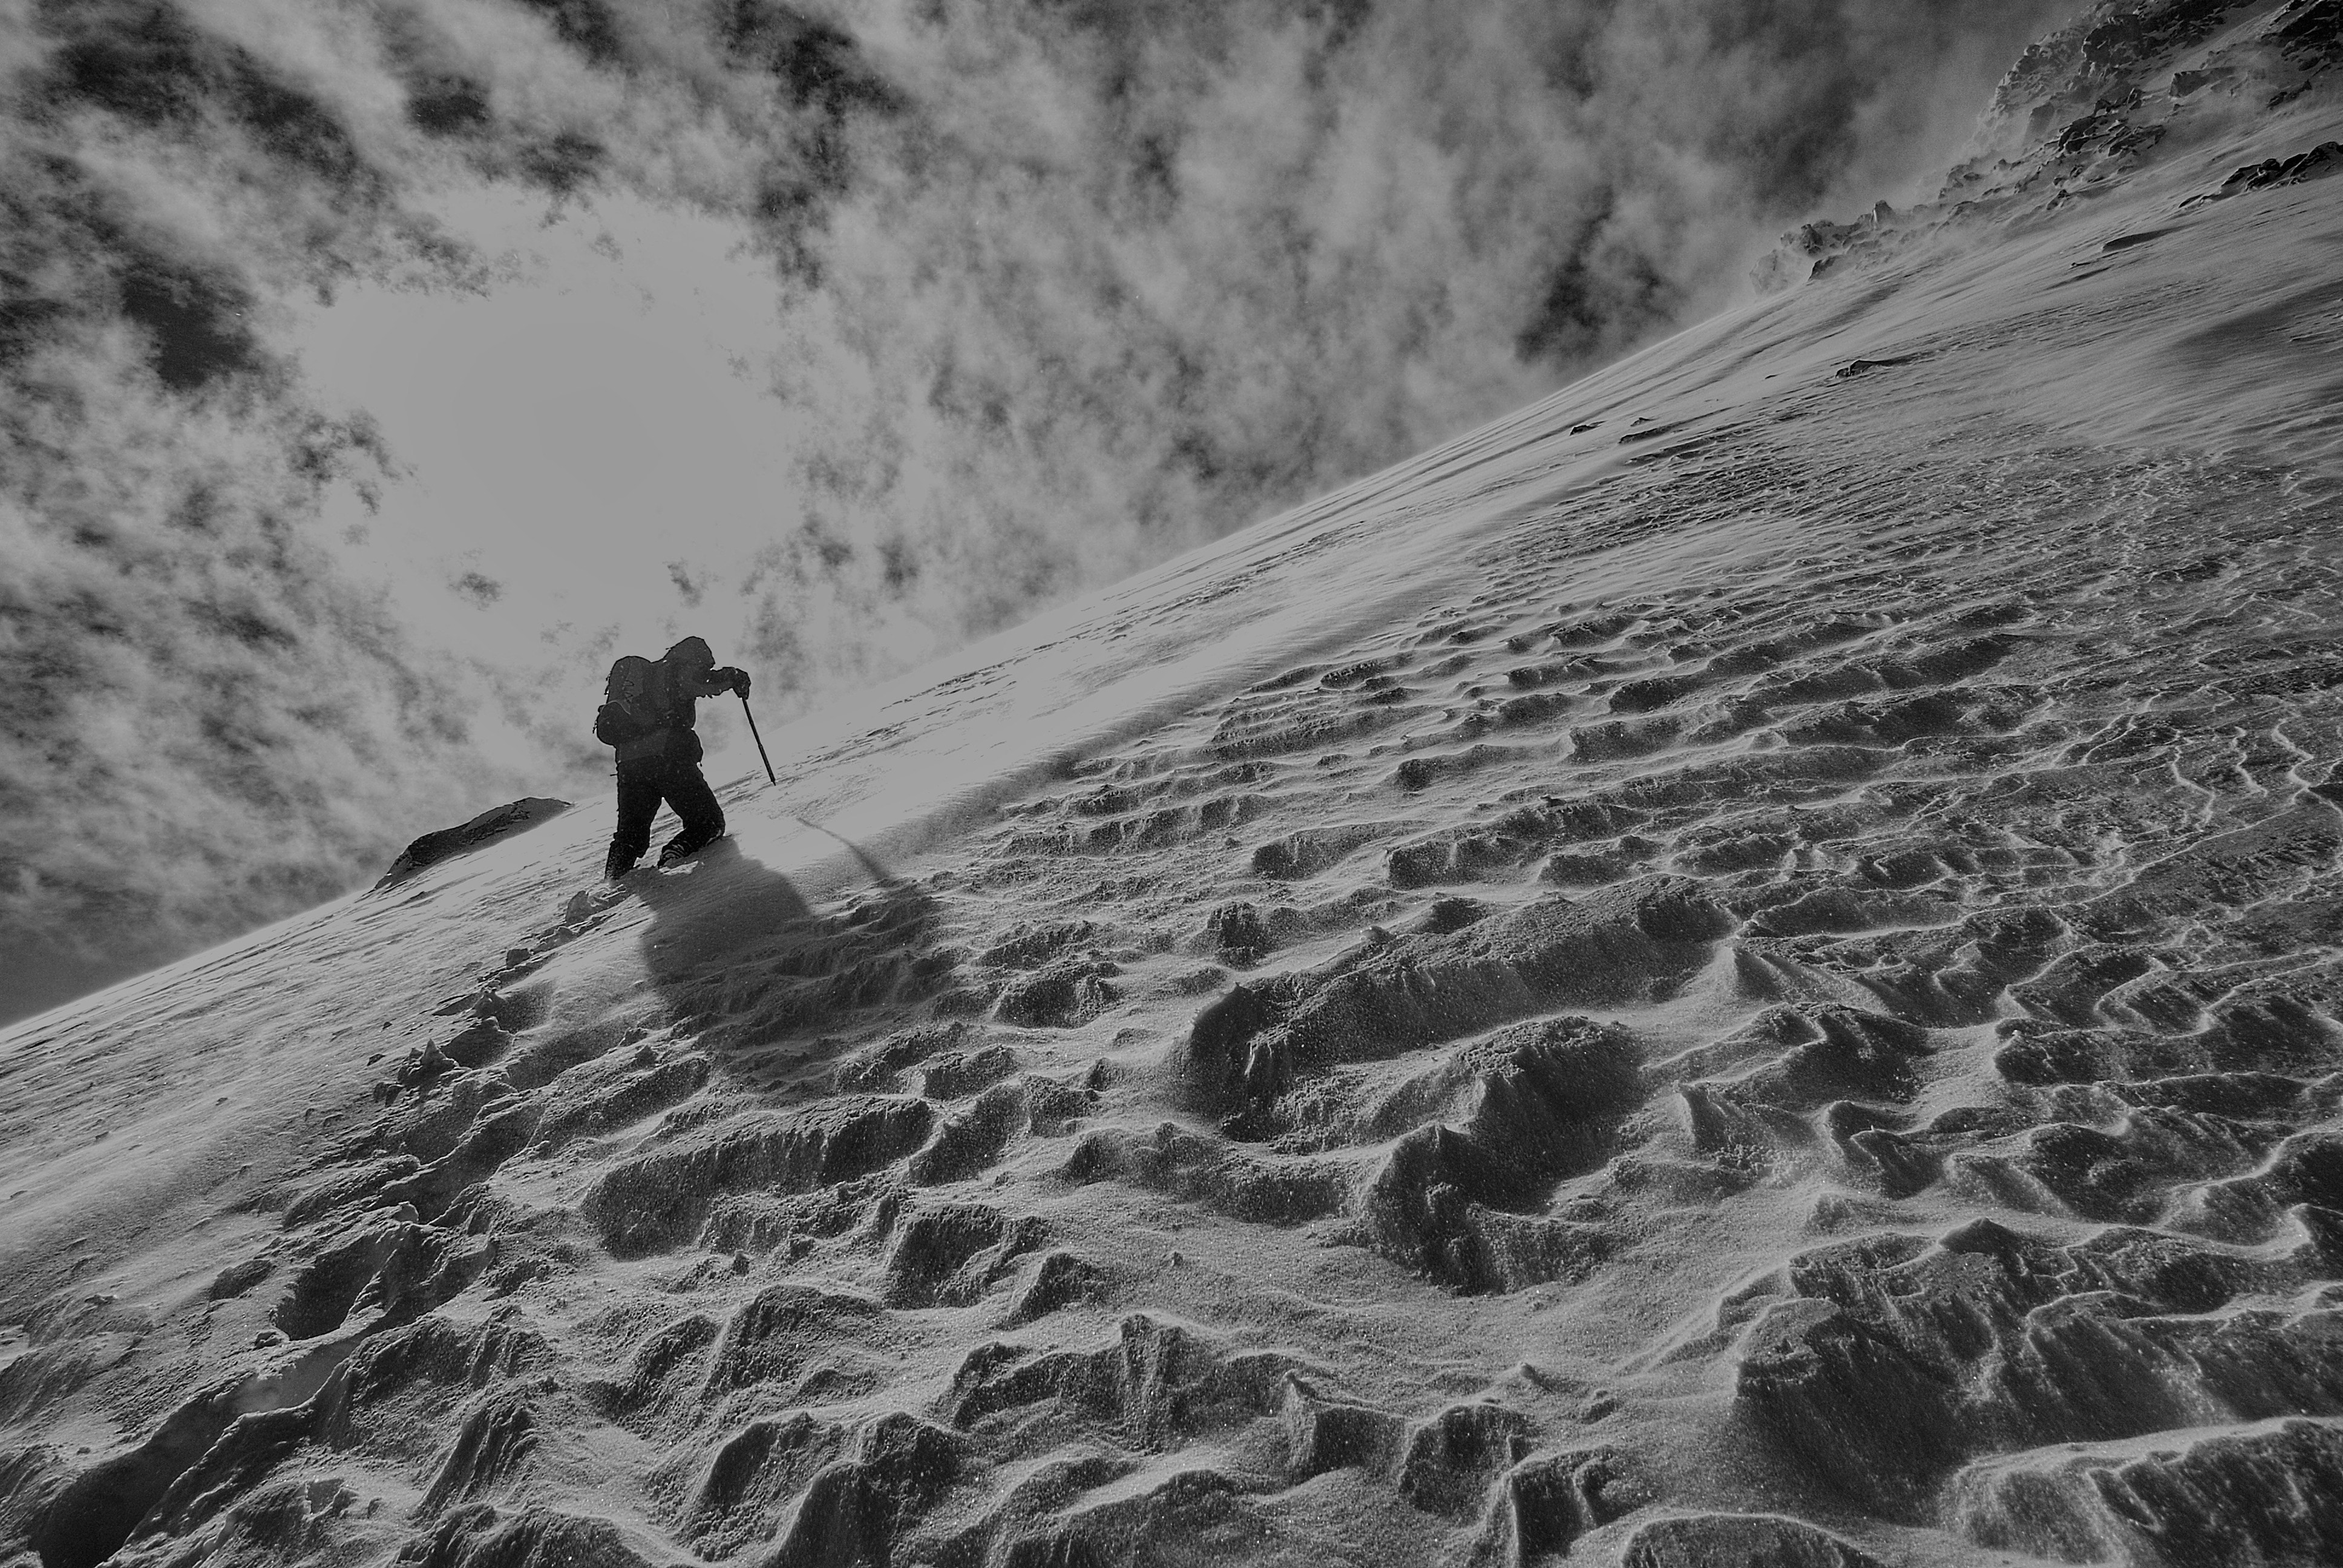 greyscale photography of a man hiking on a snow covered mountain during daytime